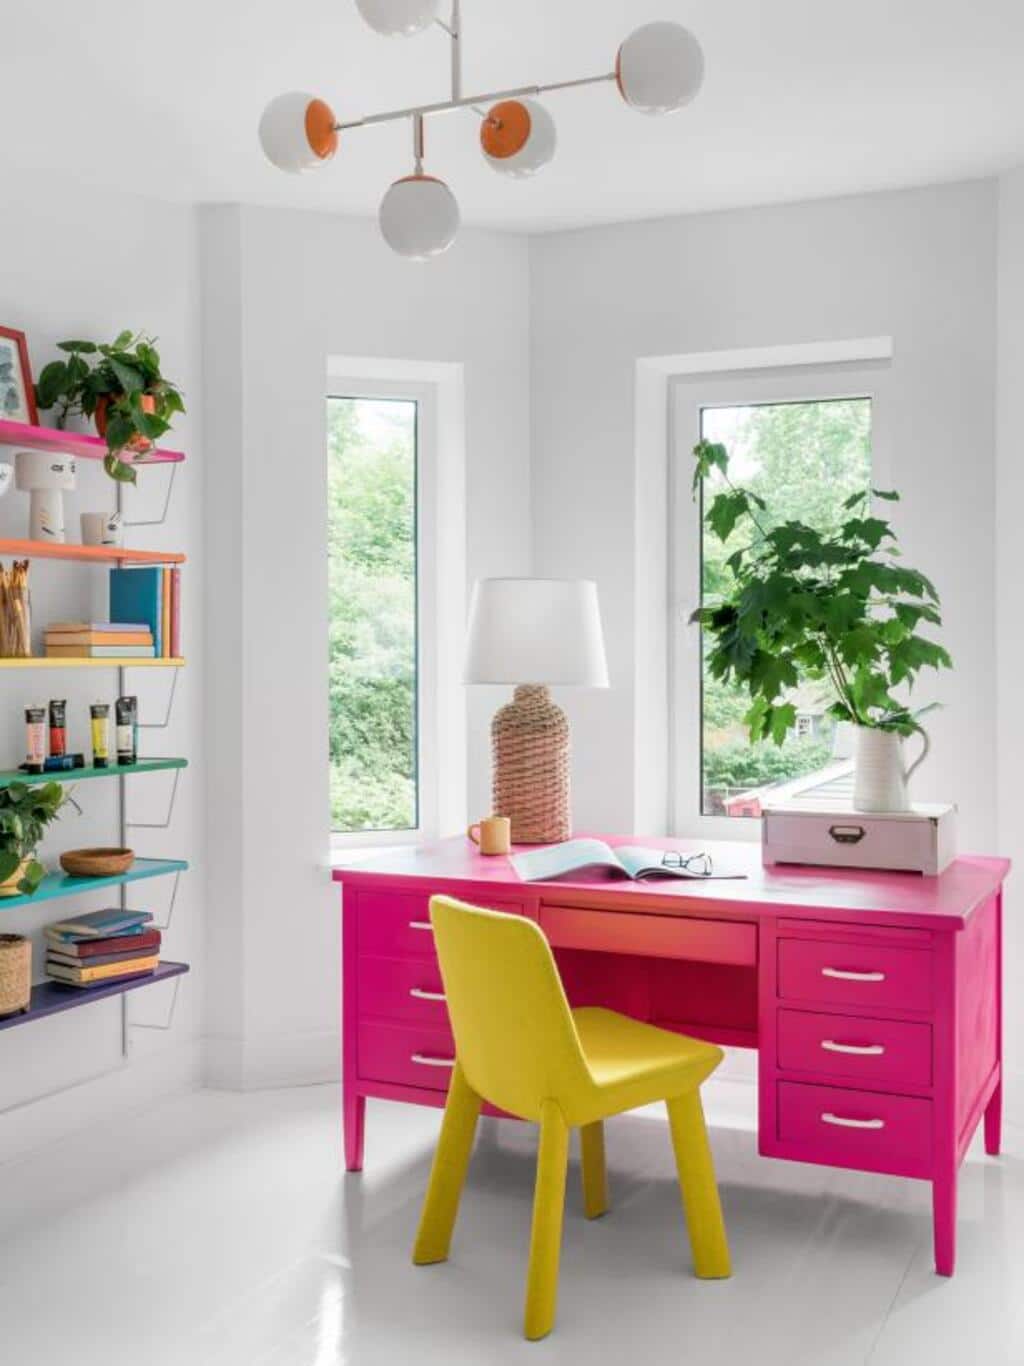 A pink desk with a yellow chair in a white room
